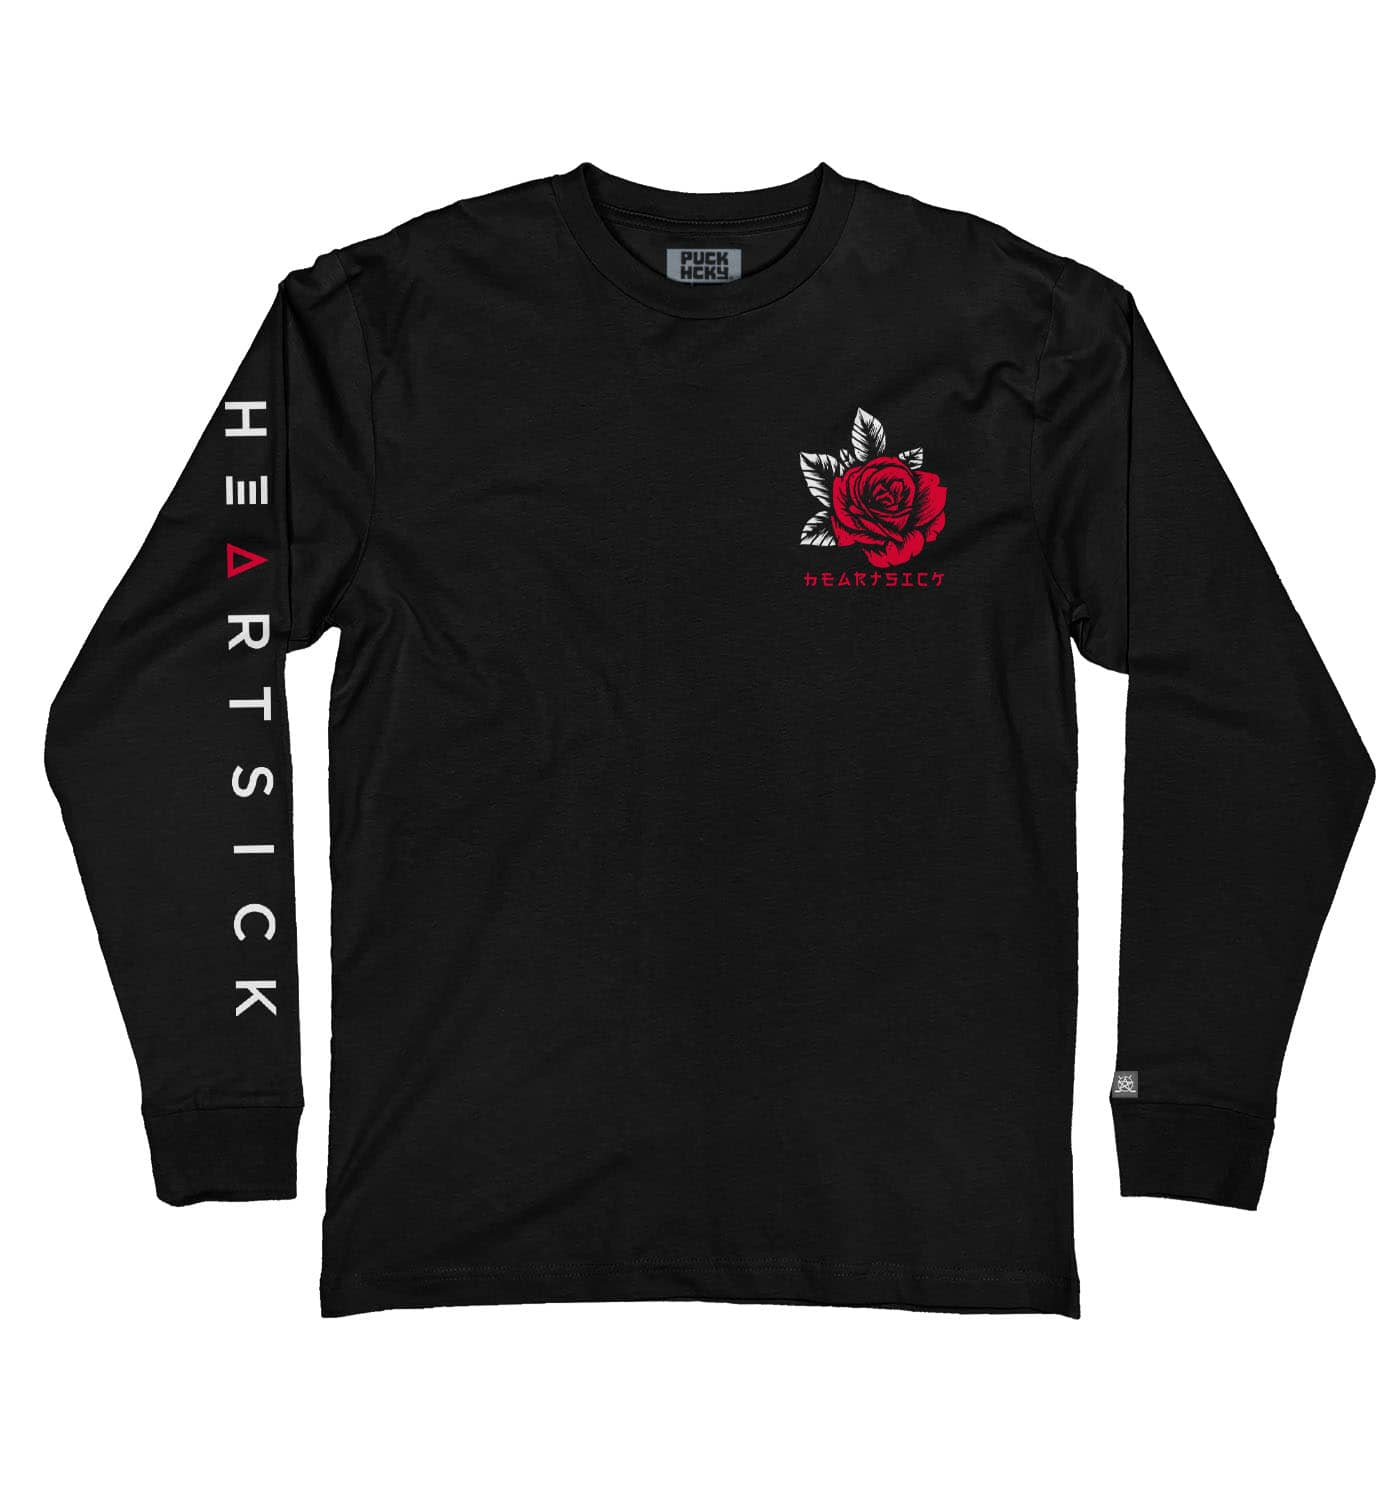 Heartsick 'The Snake and The Rose' Hockey Jersey, Black/White/Red / L